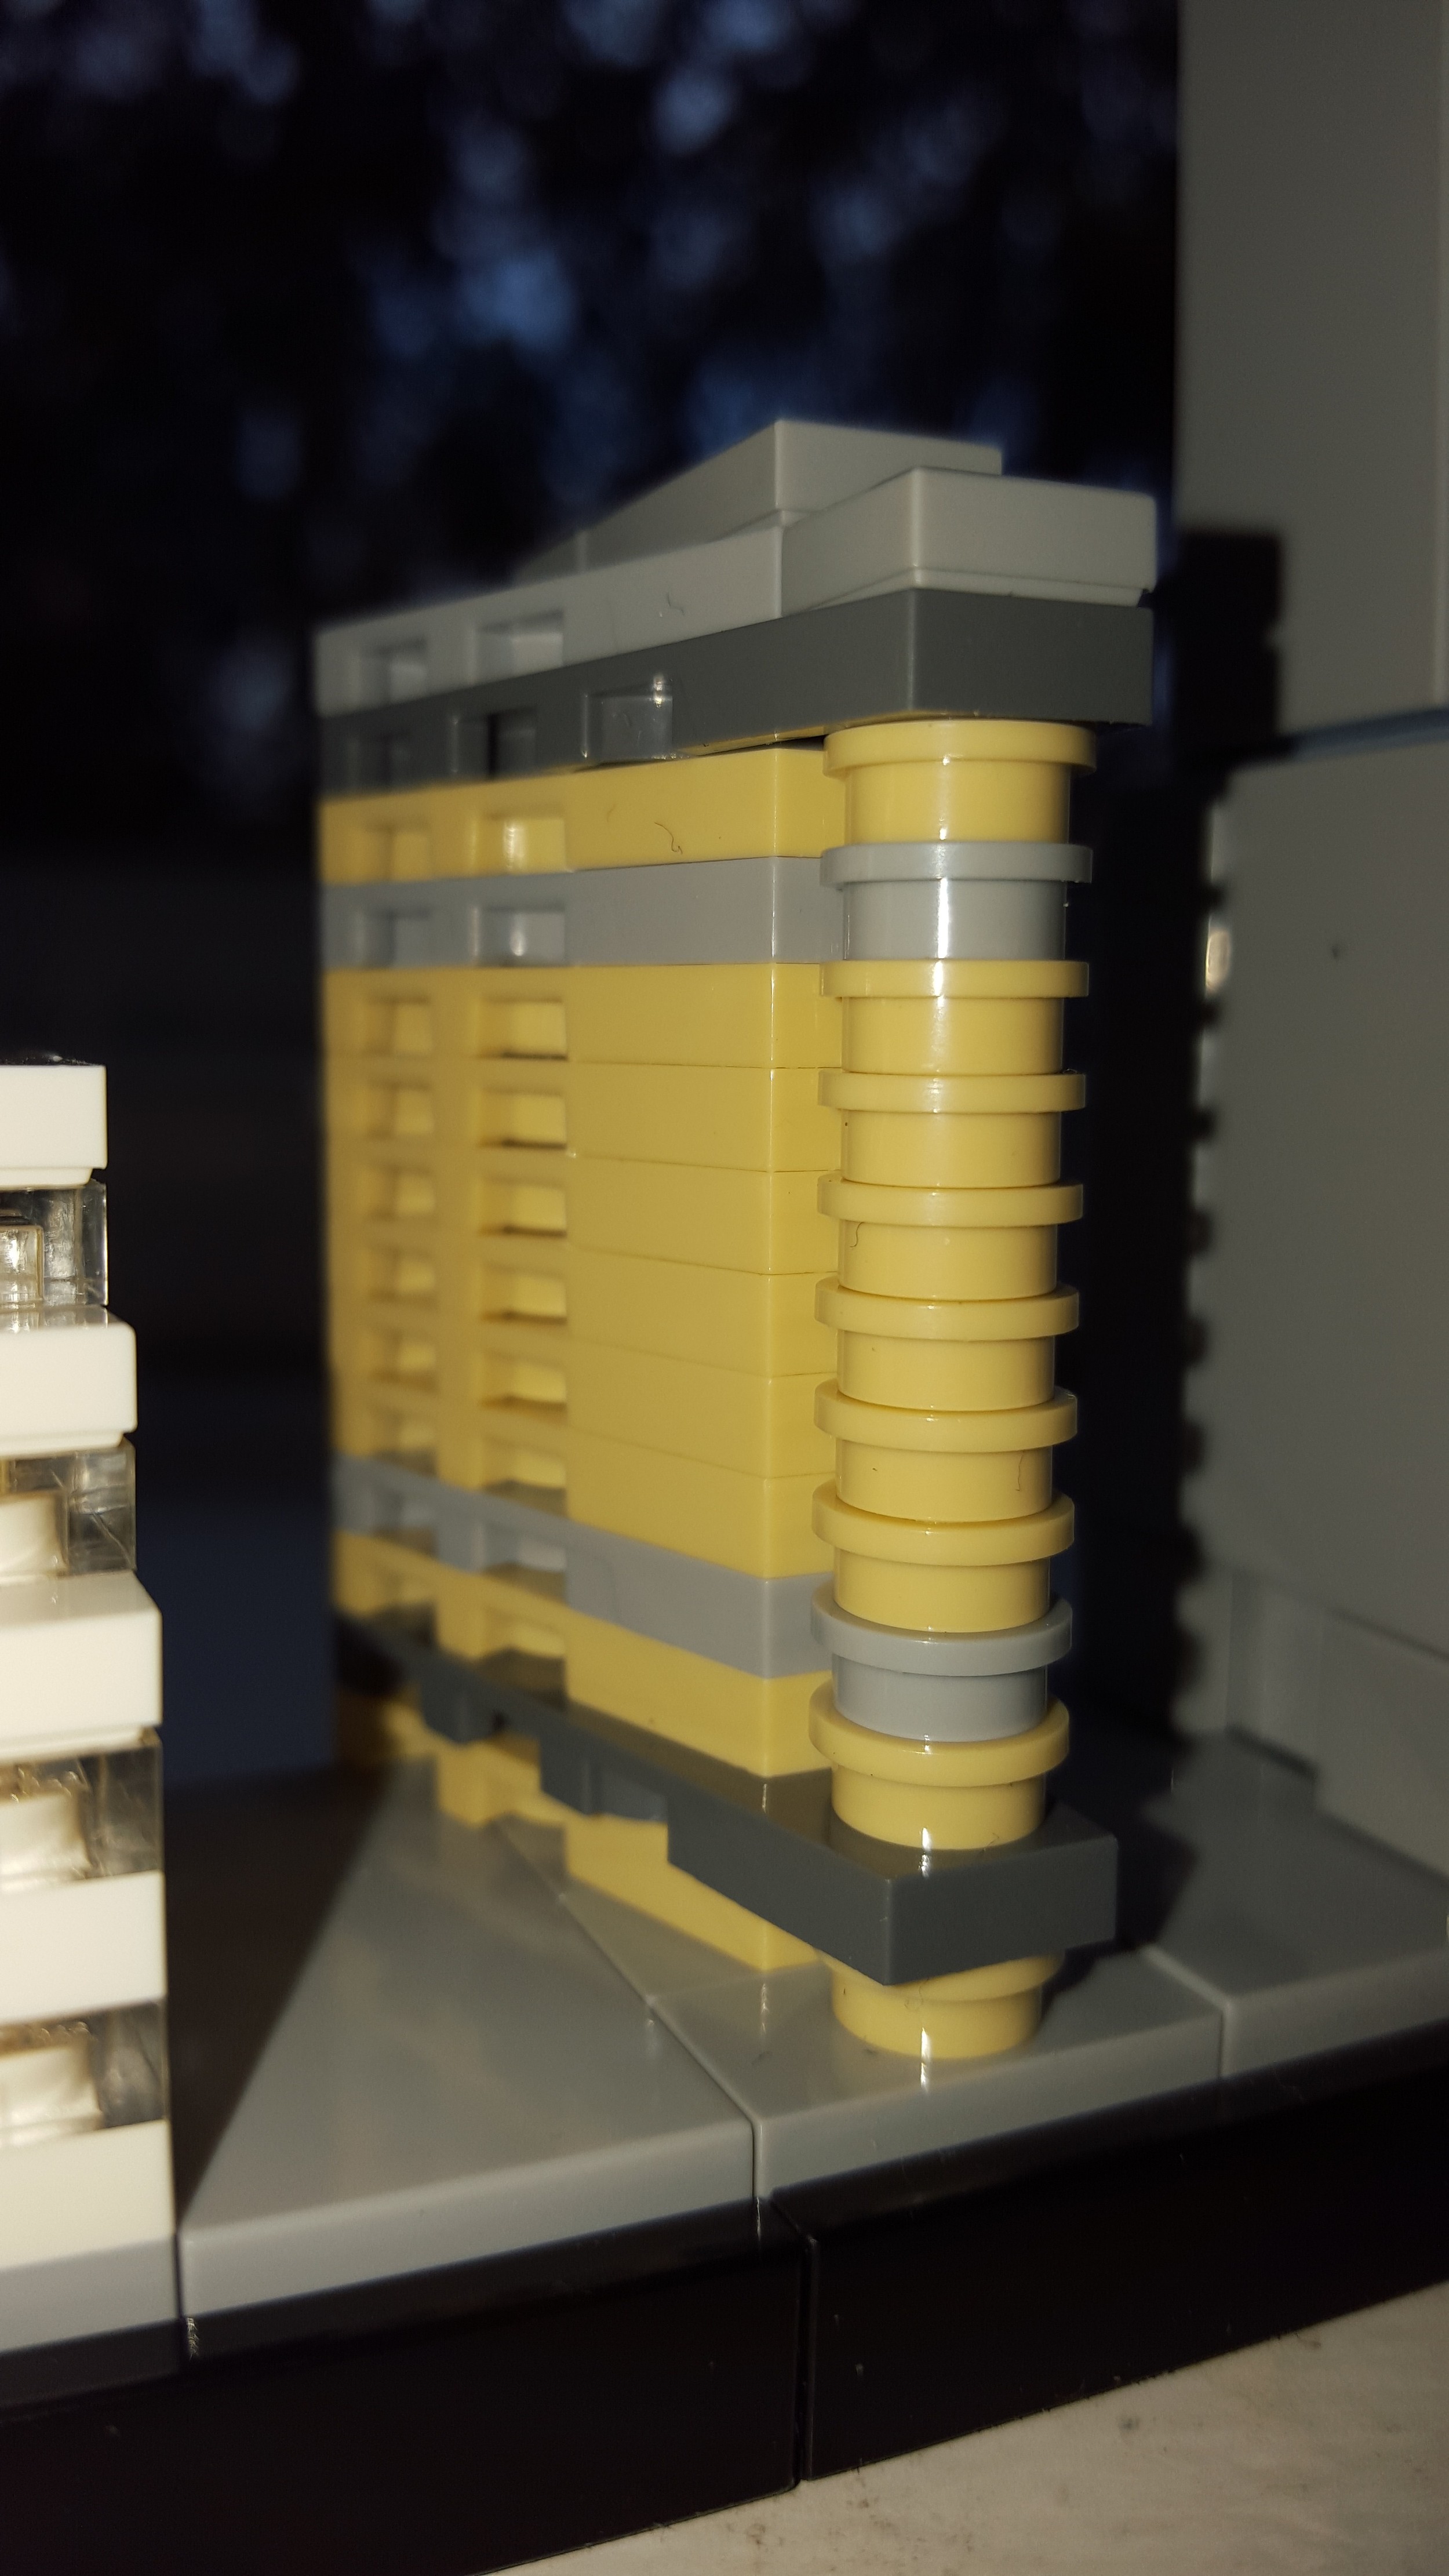 Review - LEGO Architecture New York City - BrickNerd - All things LEGO and  the LEGO fan community